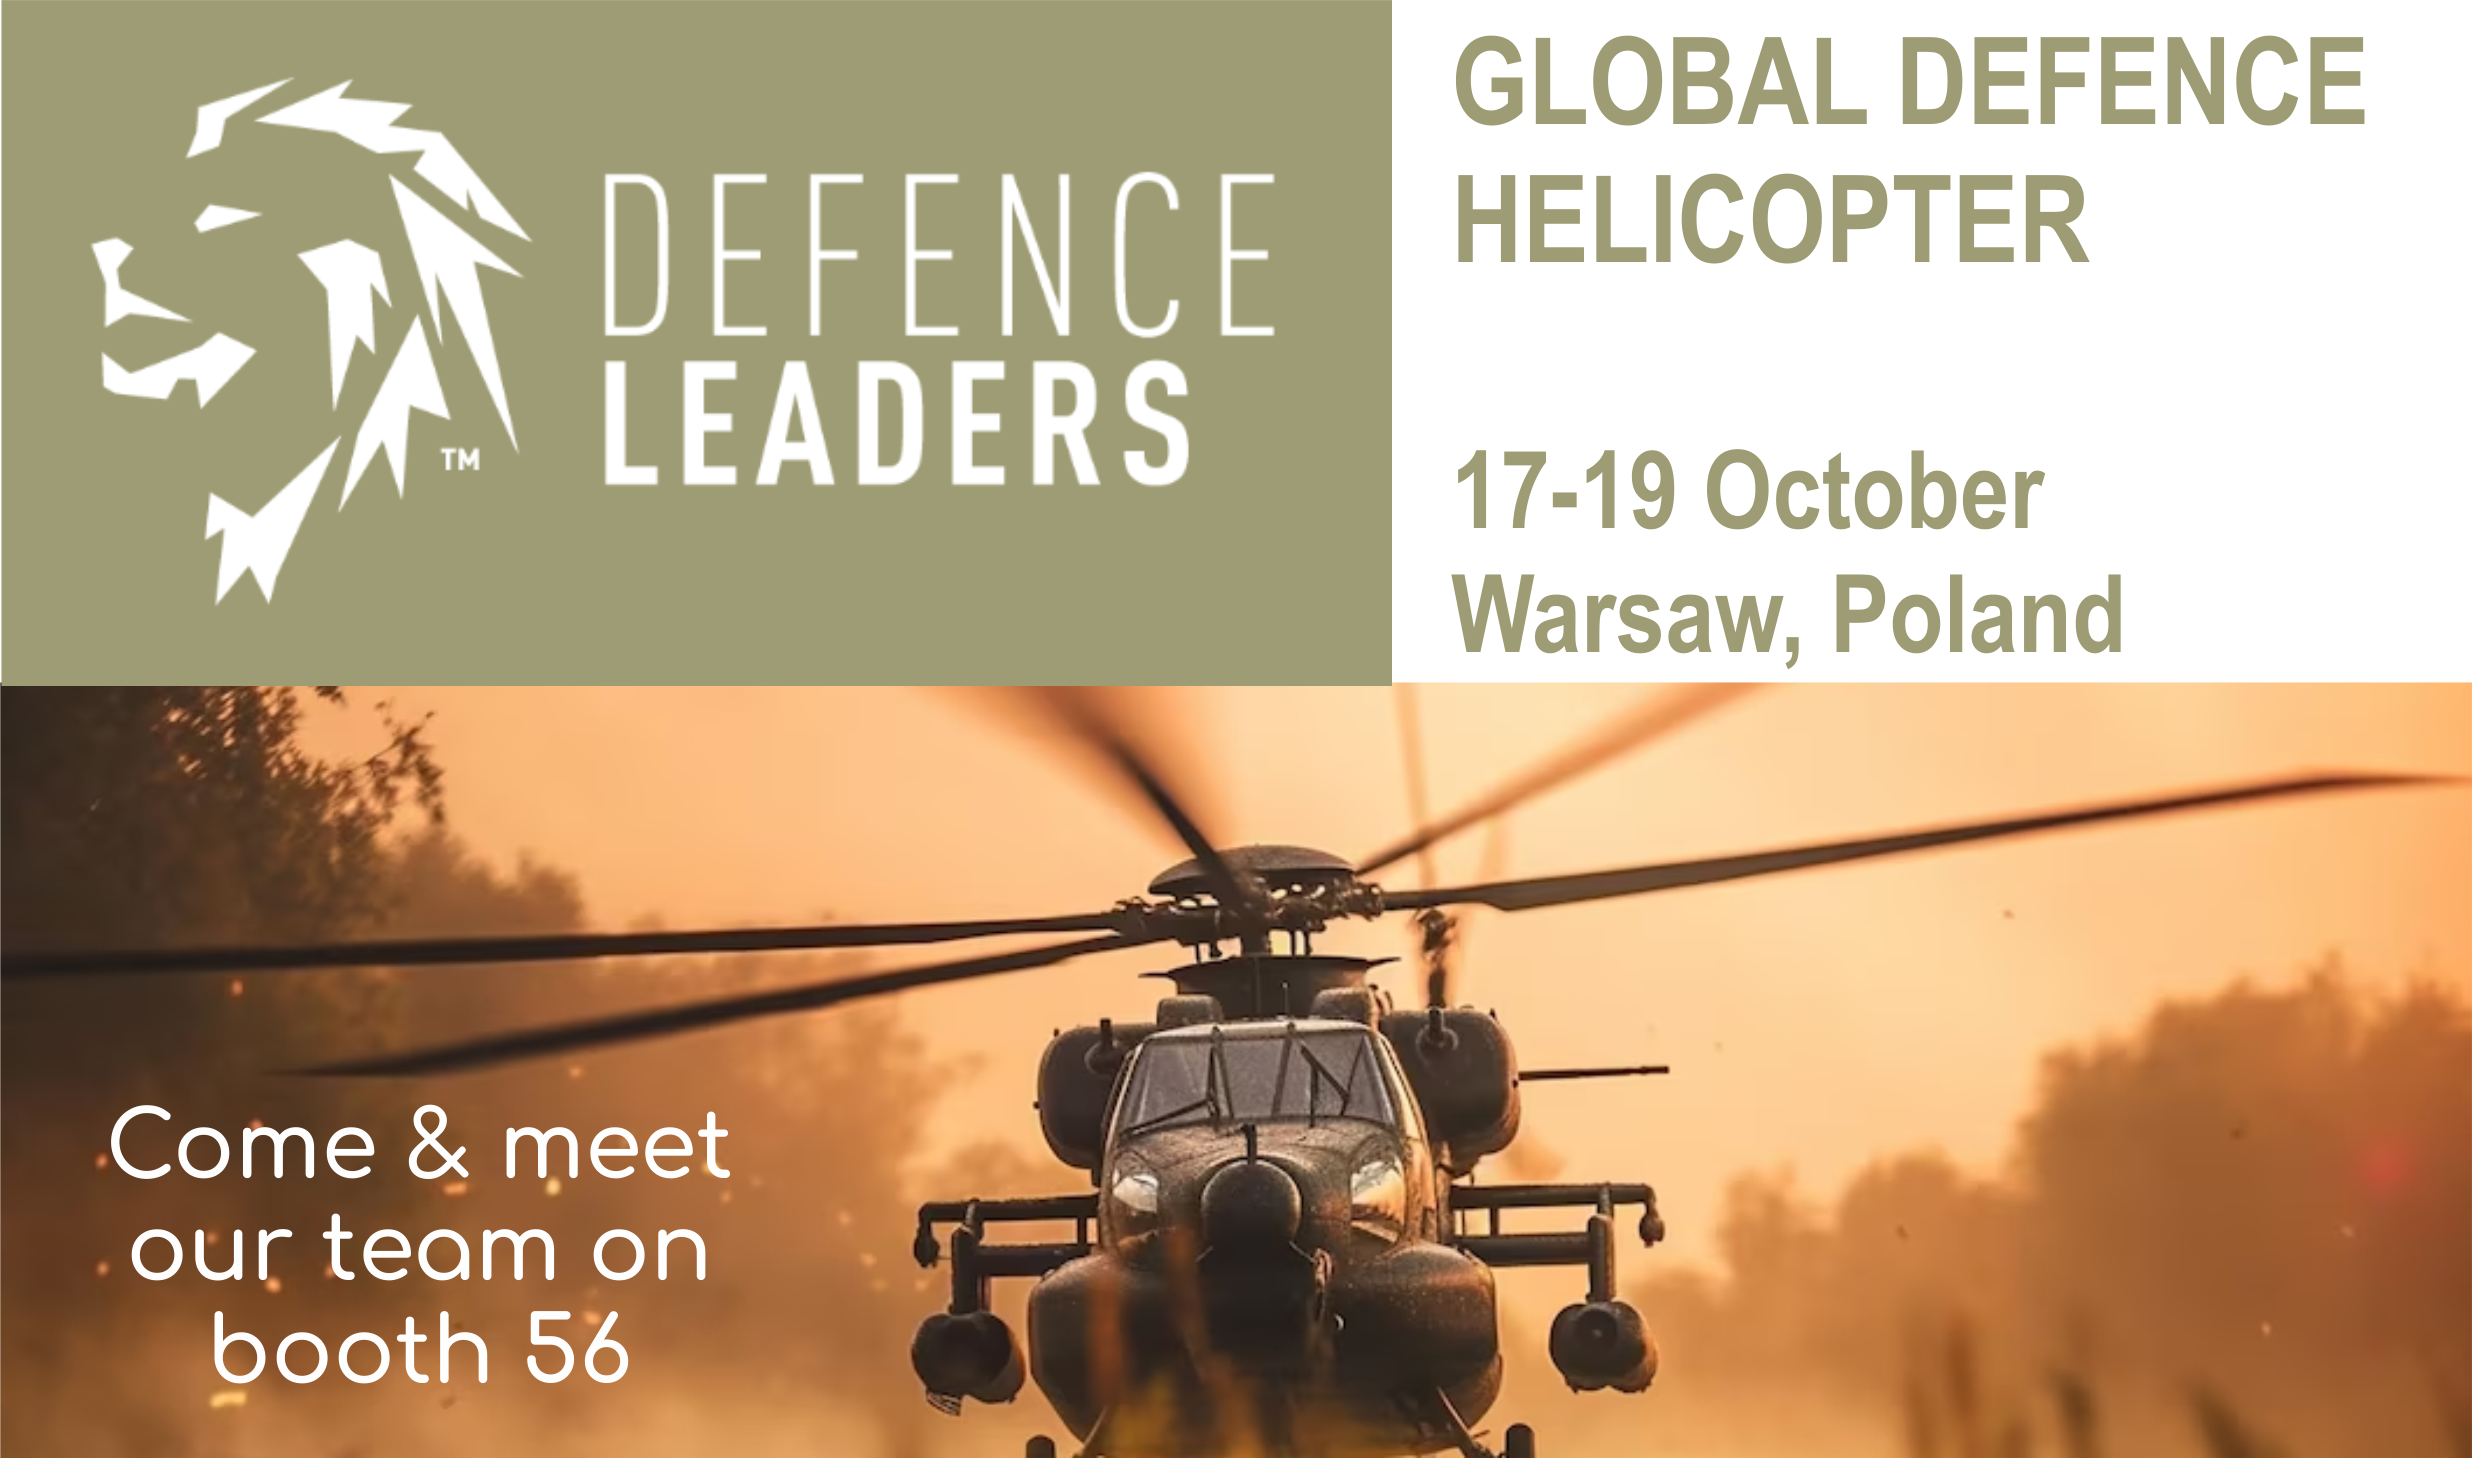 ARESIA will be present Global Defense Helicopter in Poland